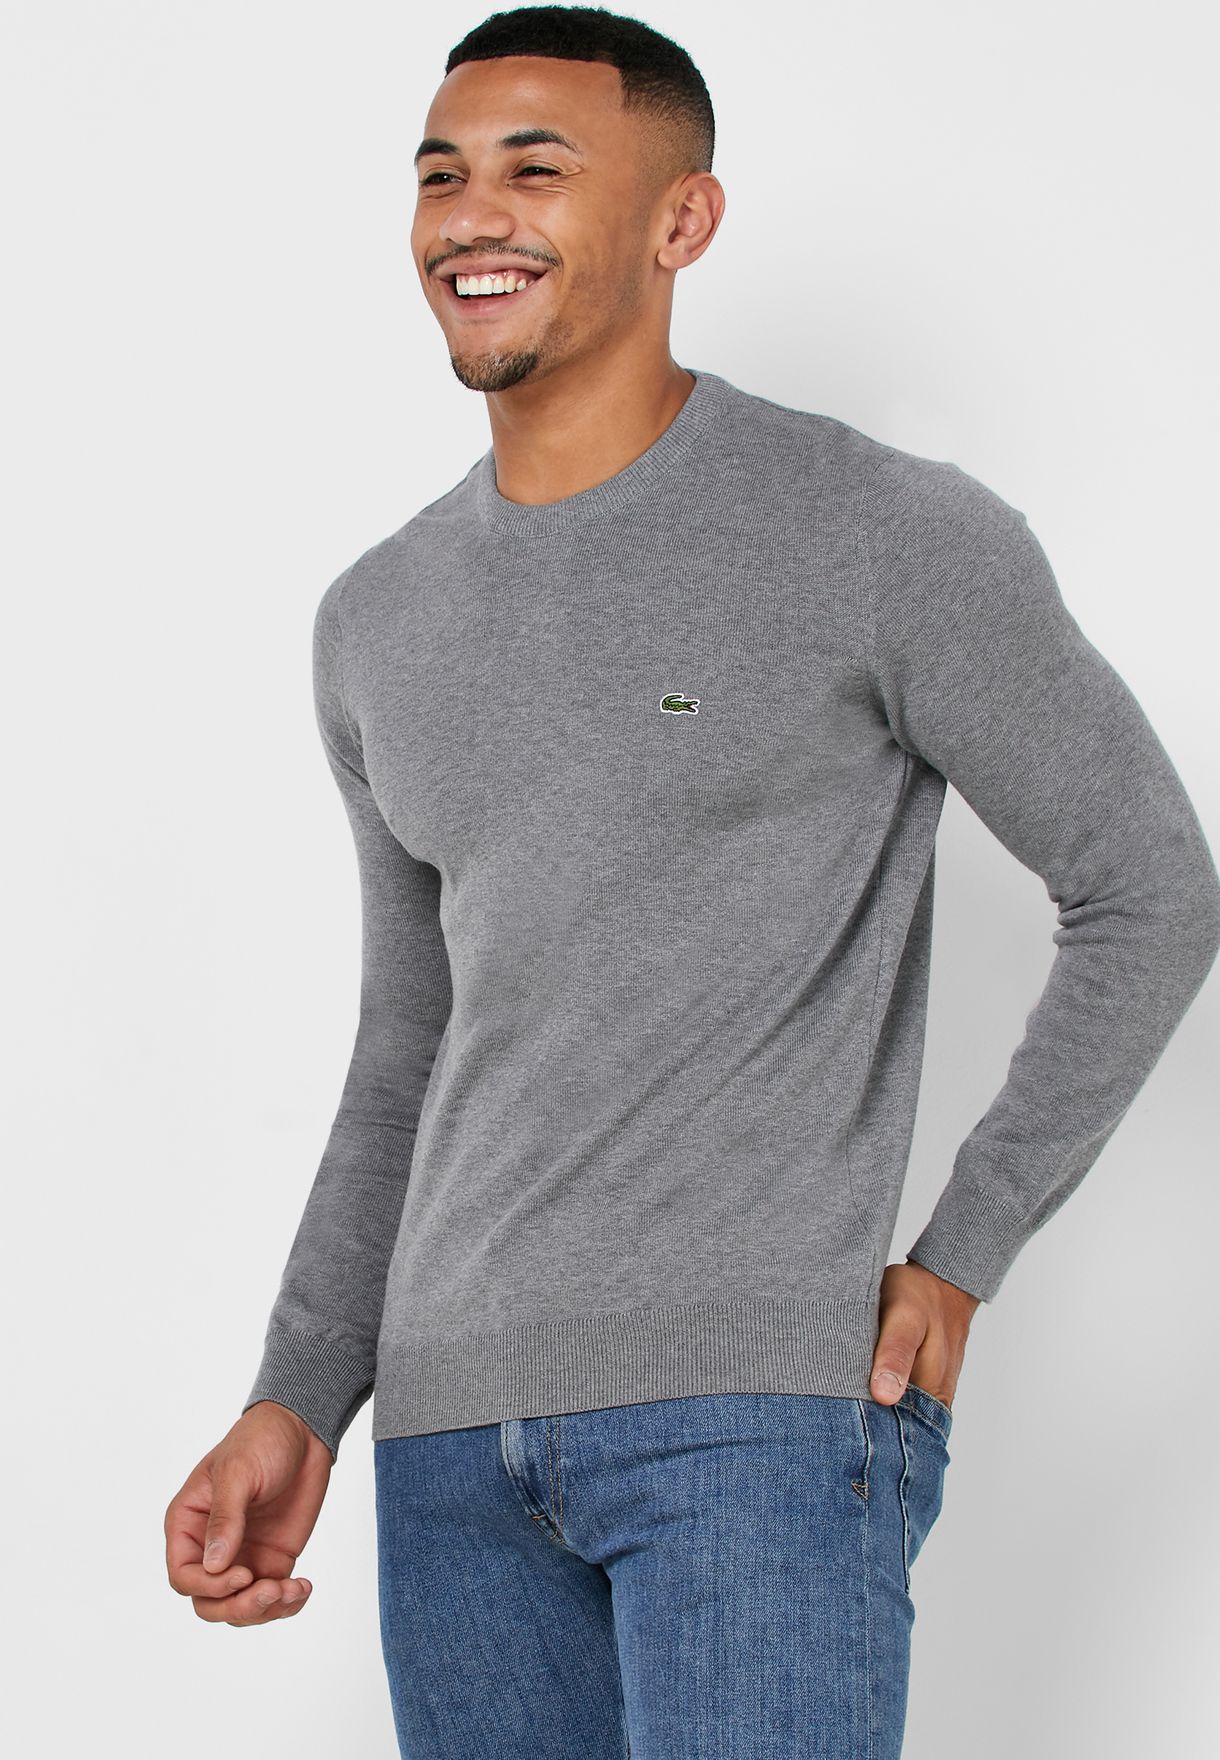 lacoste sweater grey,Save up to 17%,www.ilcascinone.com